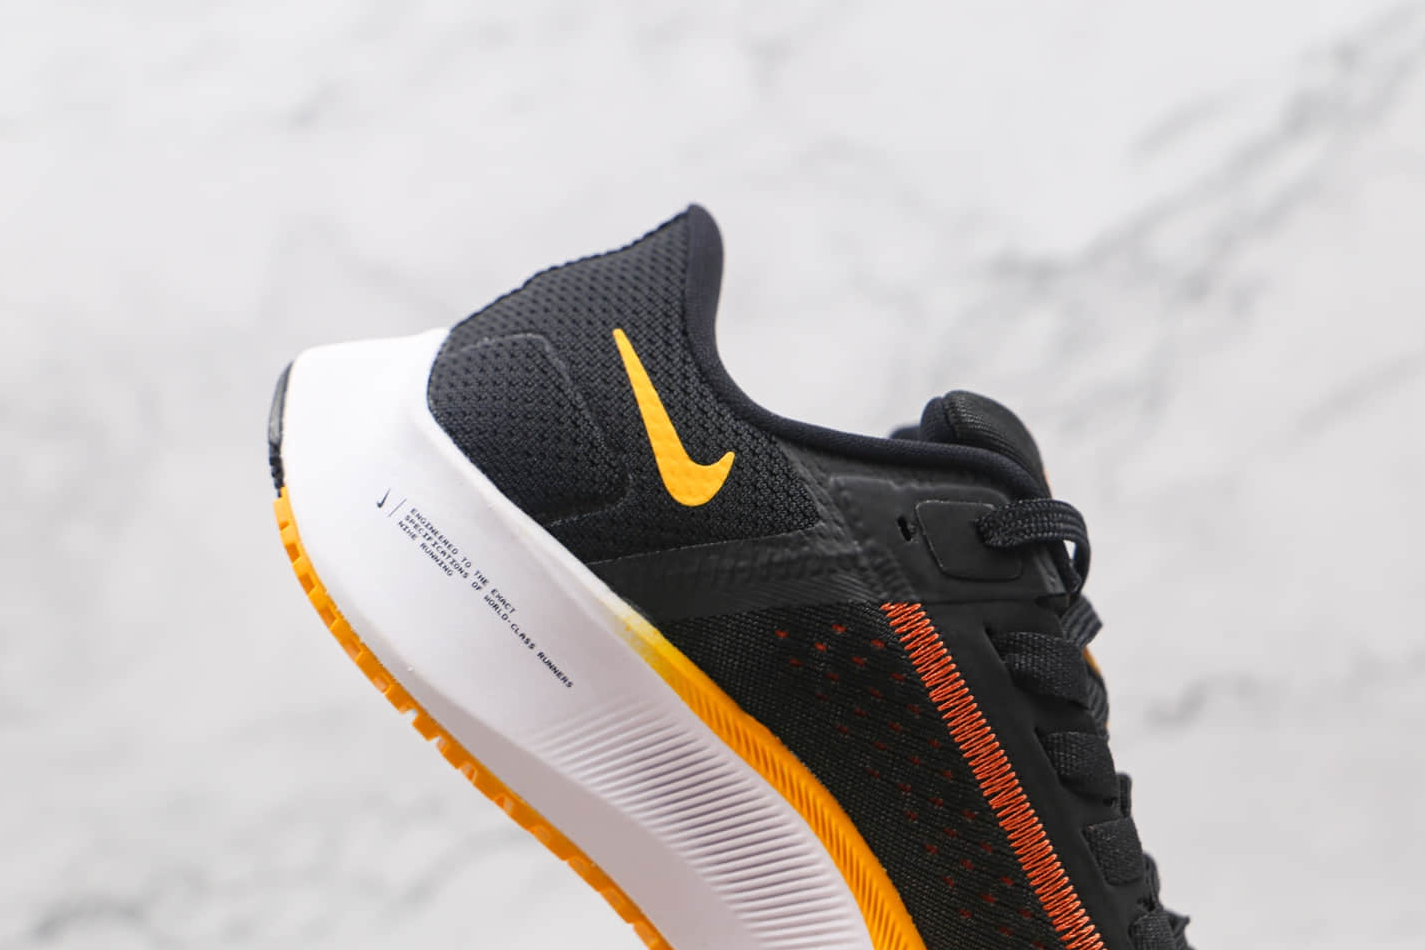 Nike Air Zoom Pegasus 38 Black White Yellow CM7602-001 - Lightweight and Cushioned Performance Running Shoes